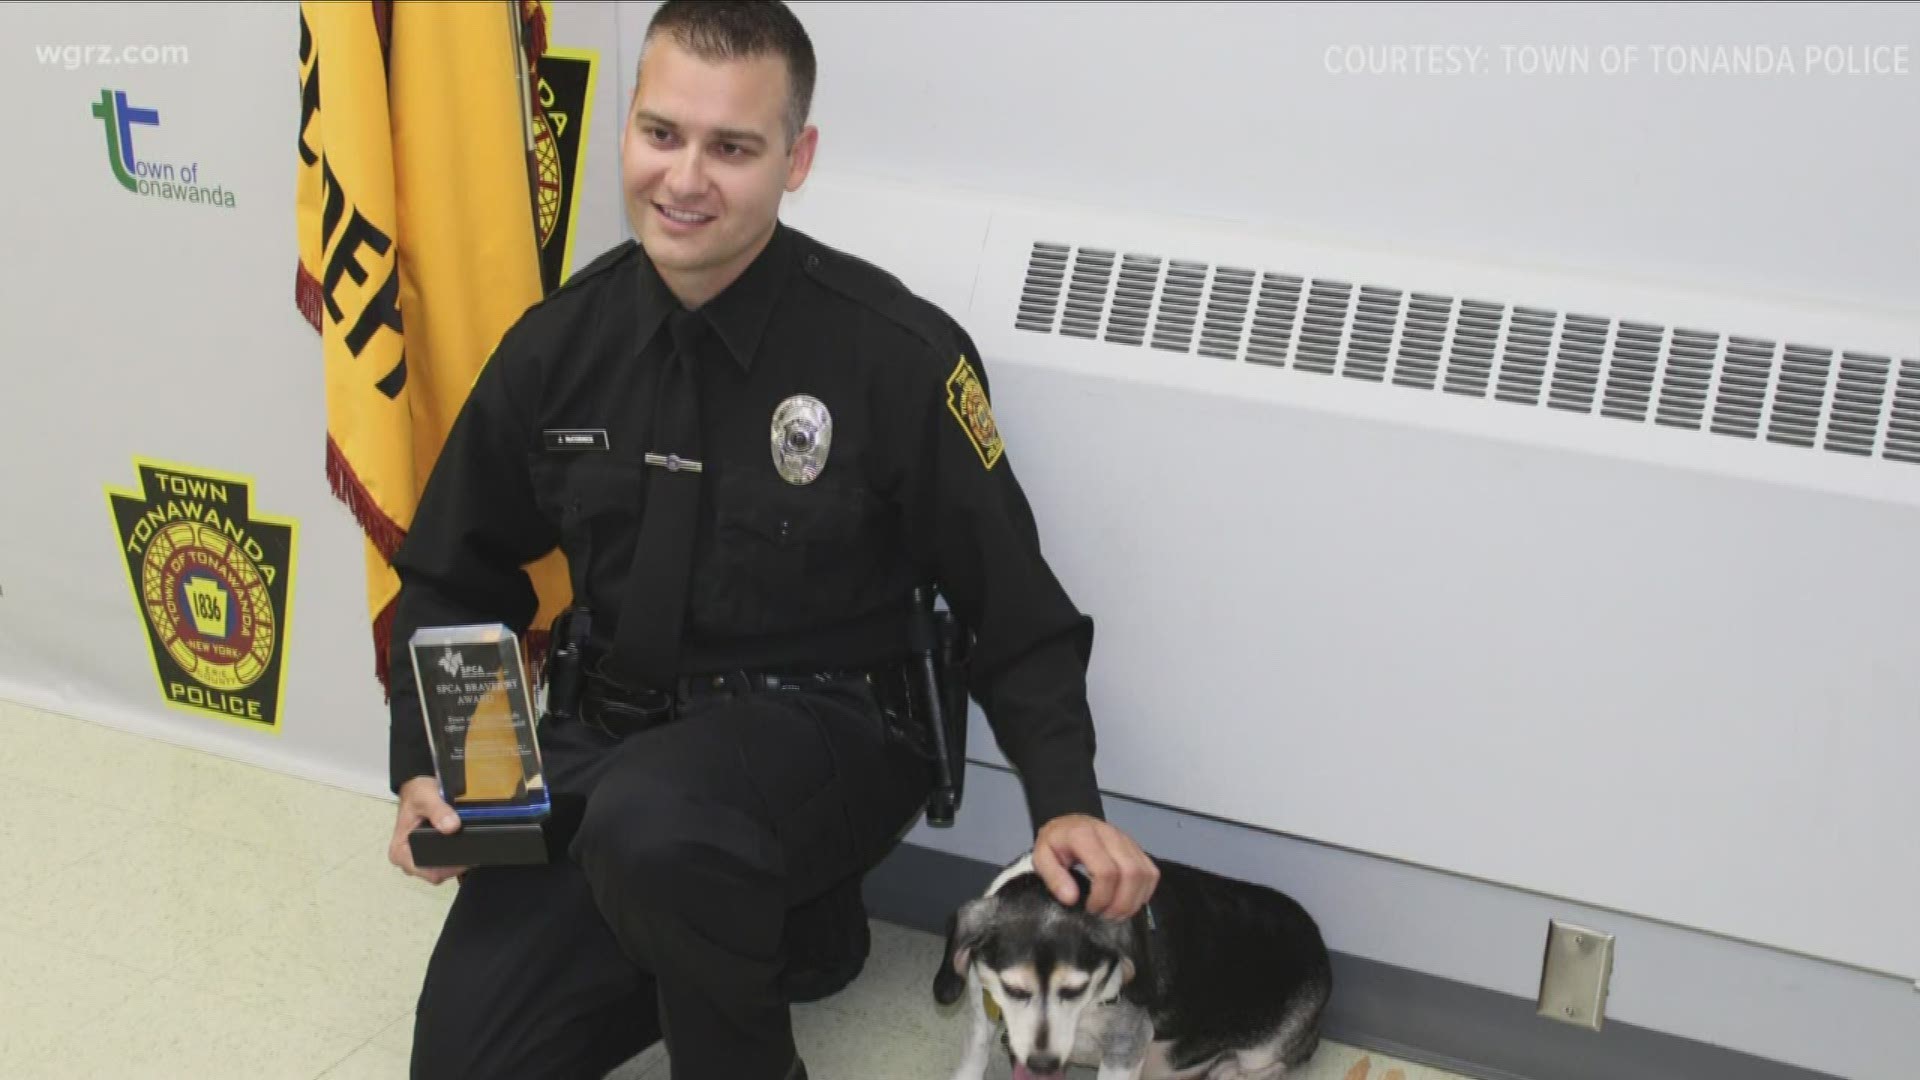 Town of Tonawanda Police officer Jacob Mccormick was honored tonight for rescuing a dog from a house fire.